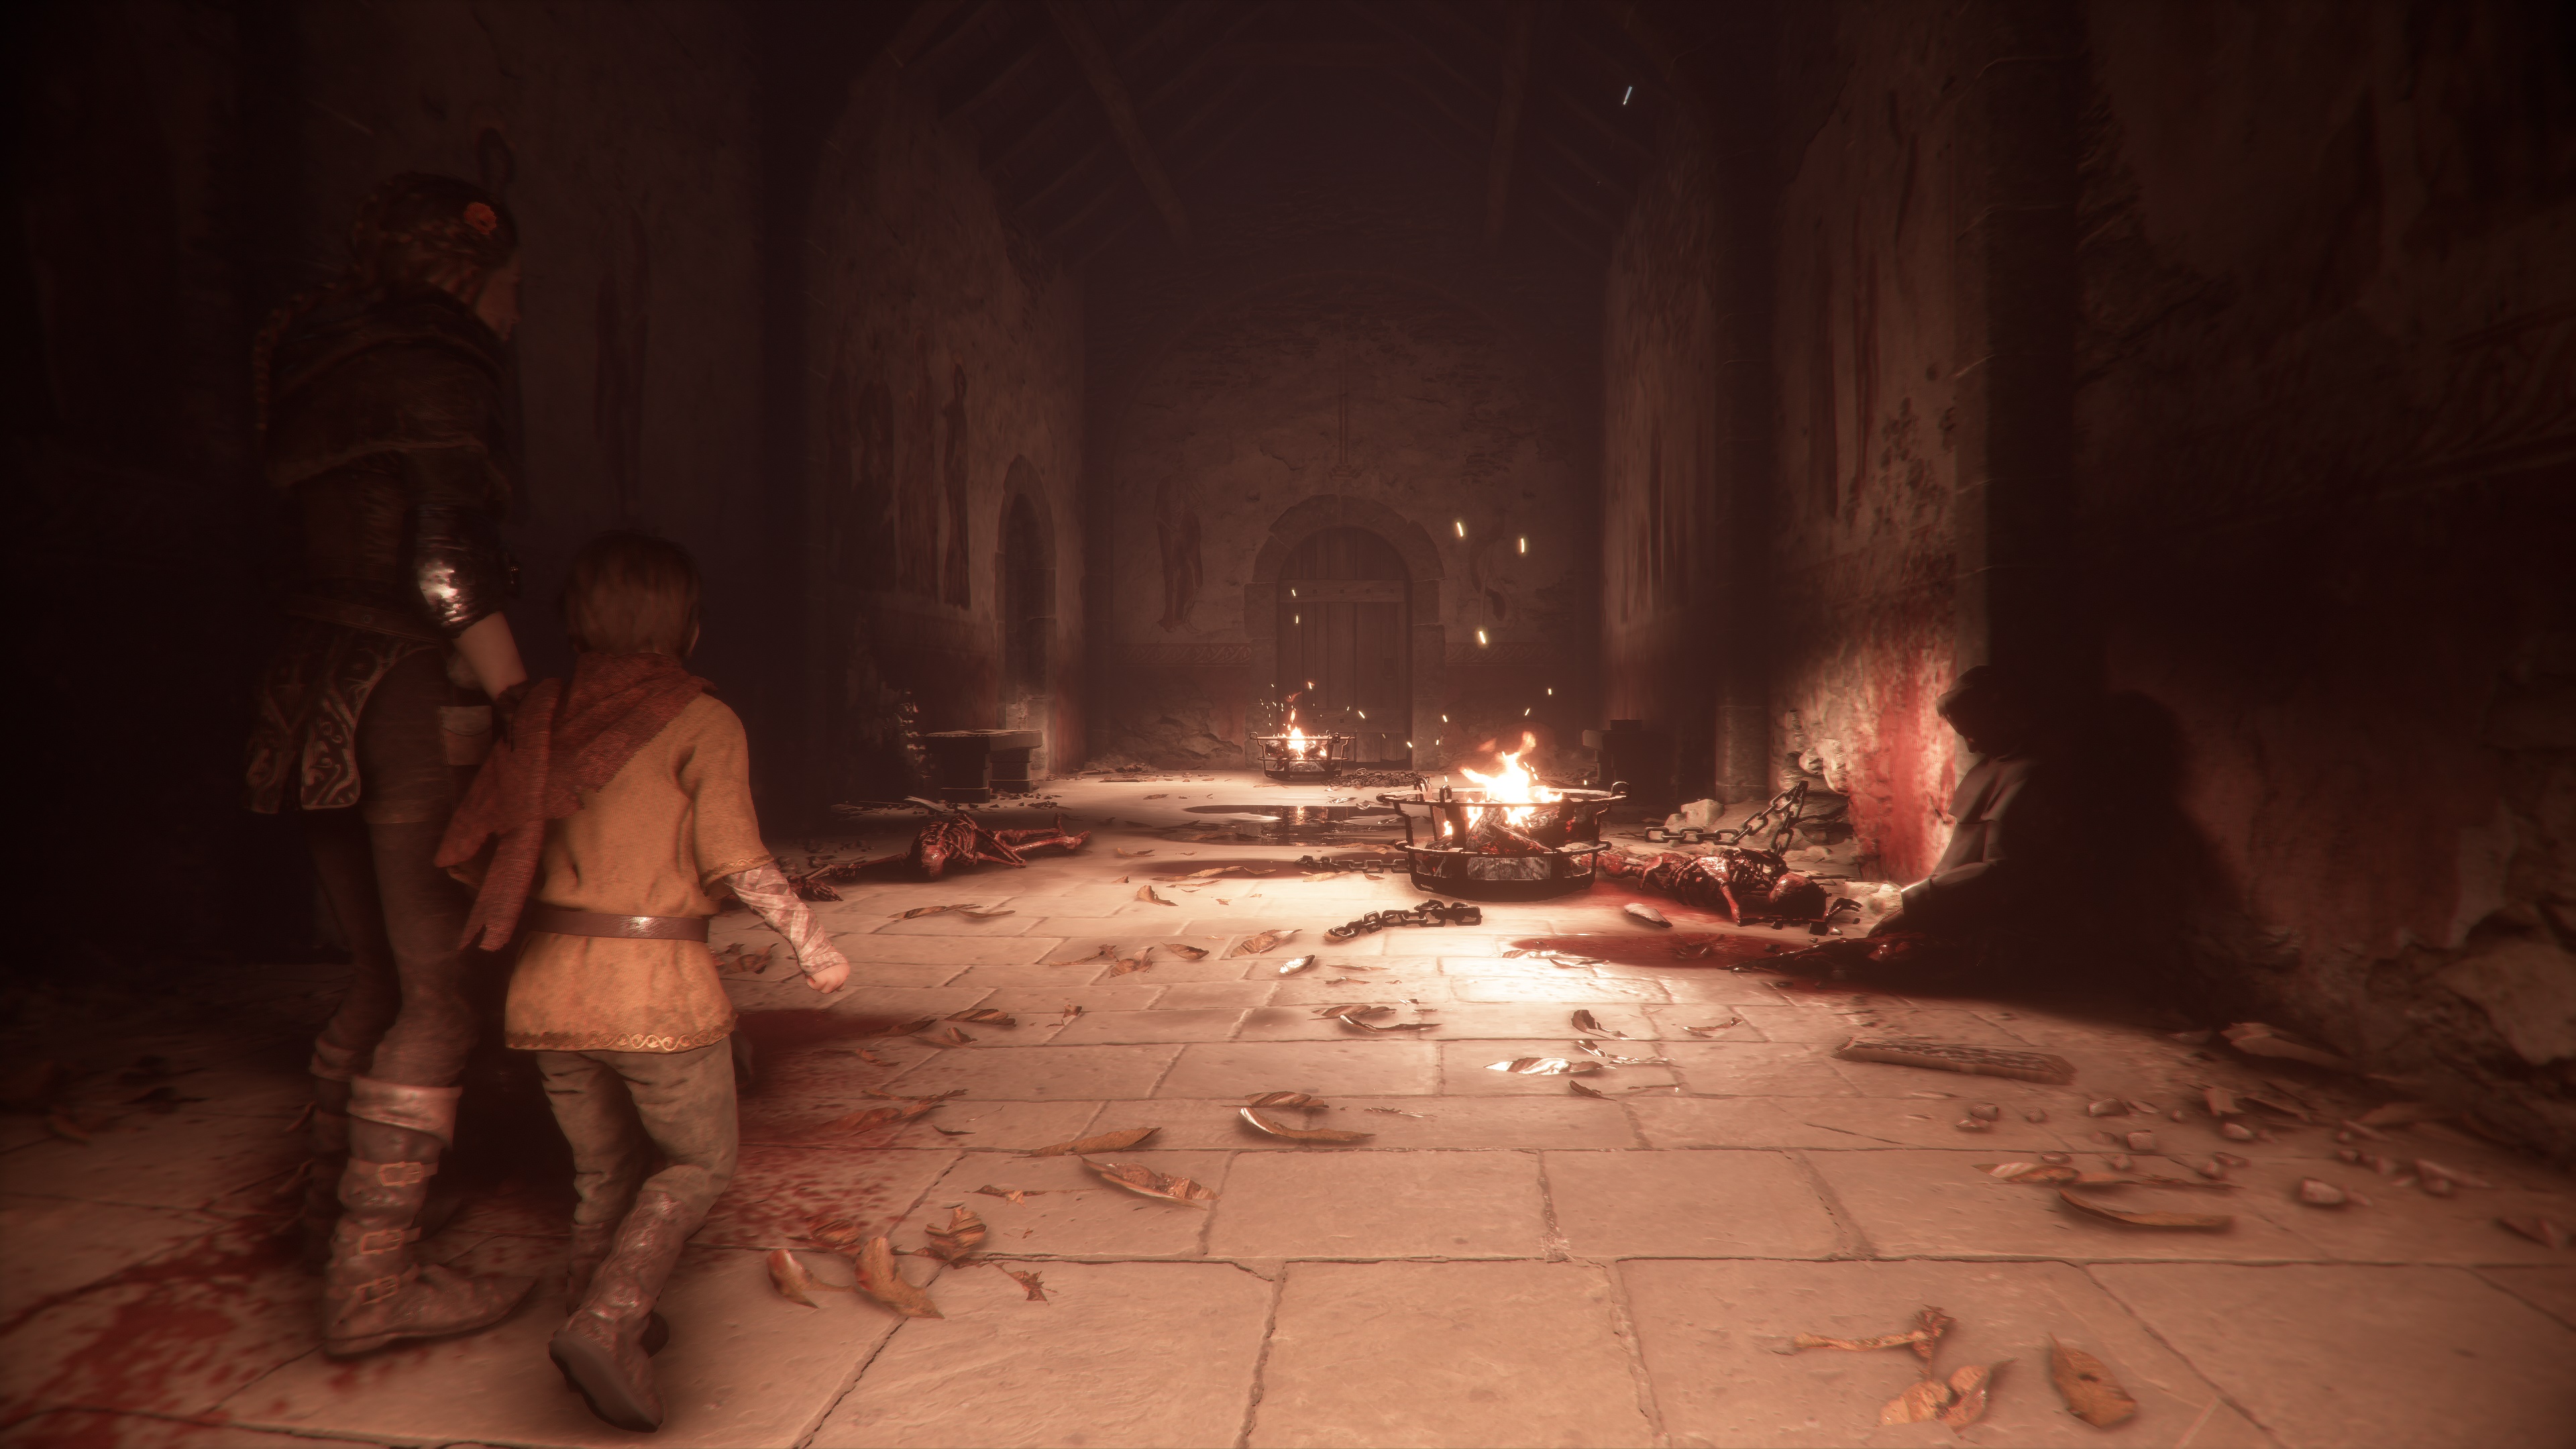 Media asset in full size related to 3dfxzone.it news item entitled as follows: Gameplay footage e screenshots in 4K del game A Plague Tale: Innocence | Image Name: news29593_A-Plague-Tale-Innocence-Screenshot_6.jpg